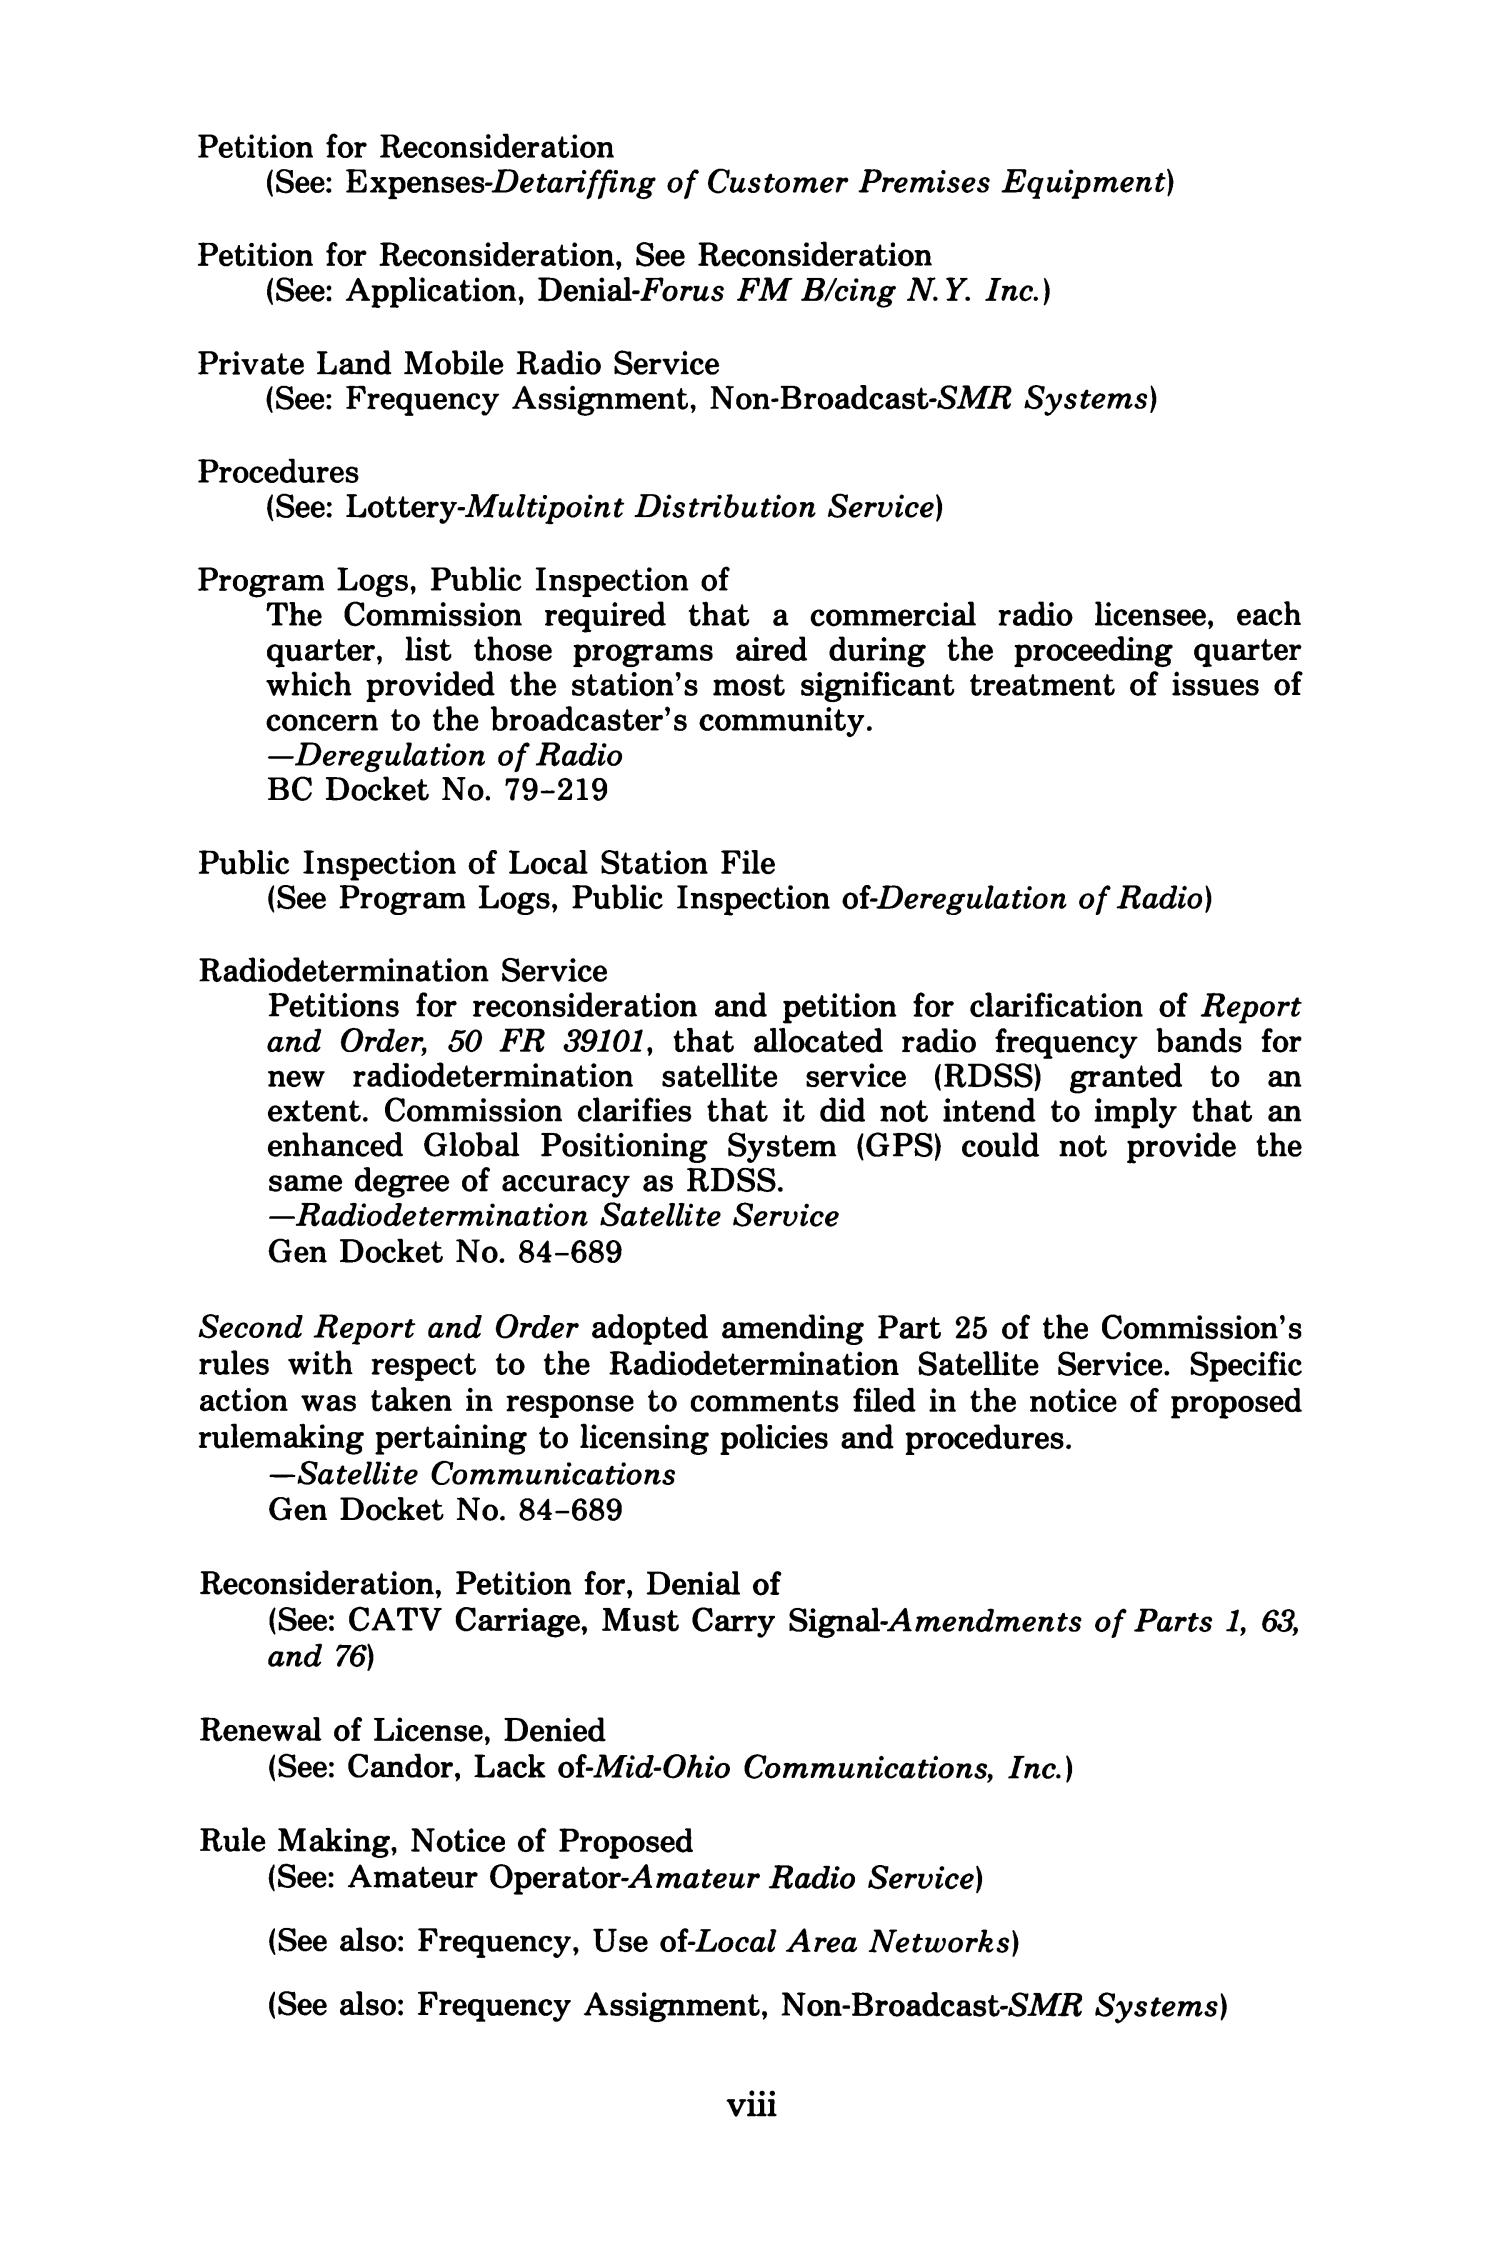 FCC Reports, Second Series, Volume 104, Number 2, Pages 375 to 719, August 1986
                                                
                                                    VIII
                                                